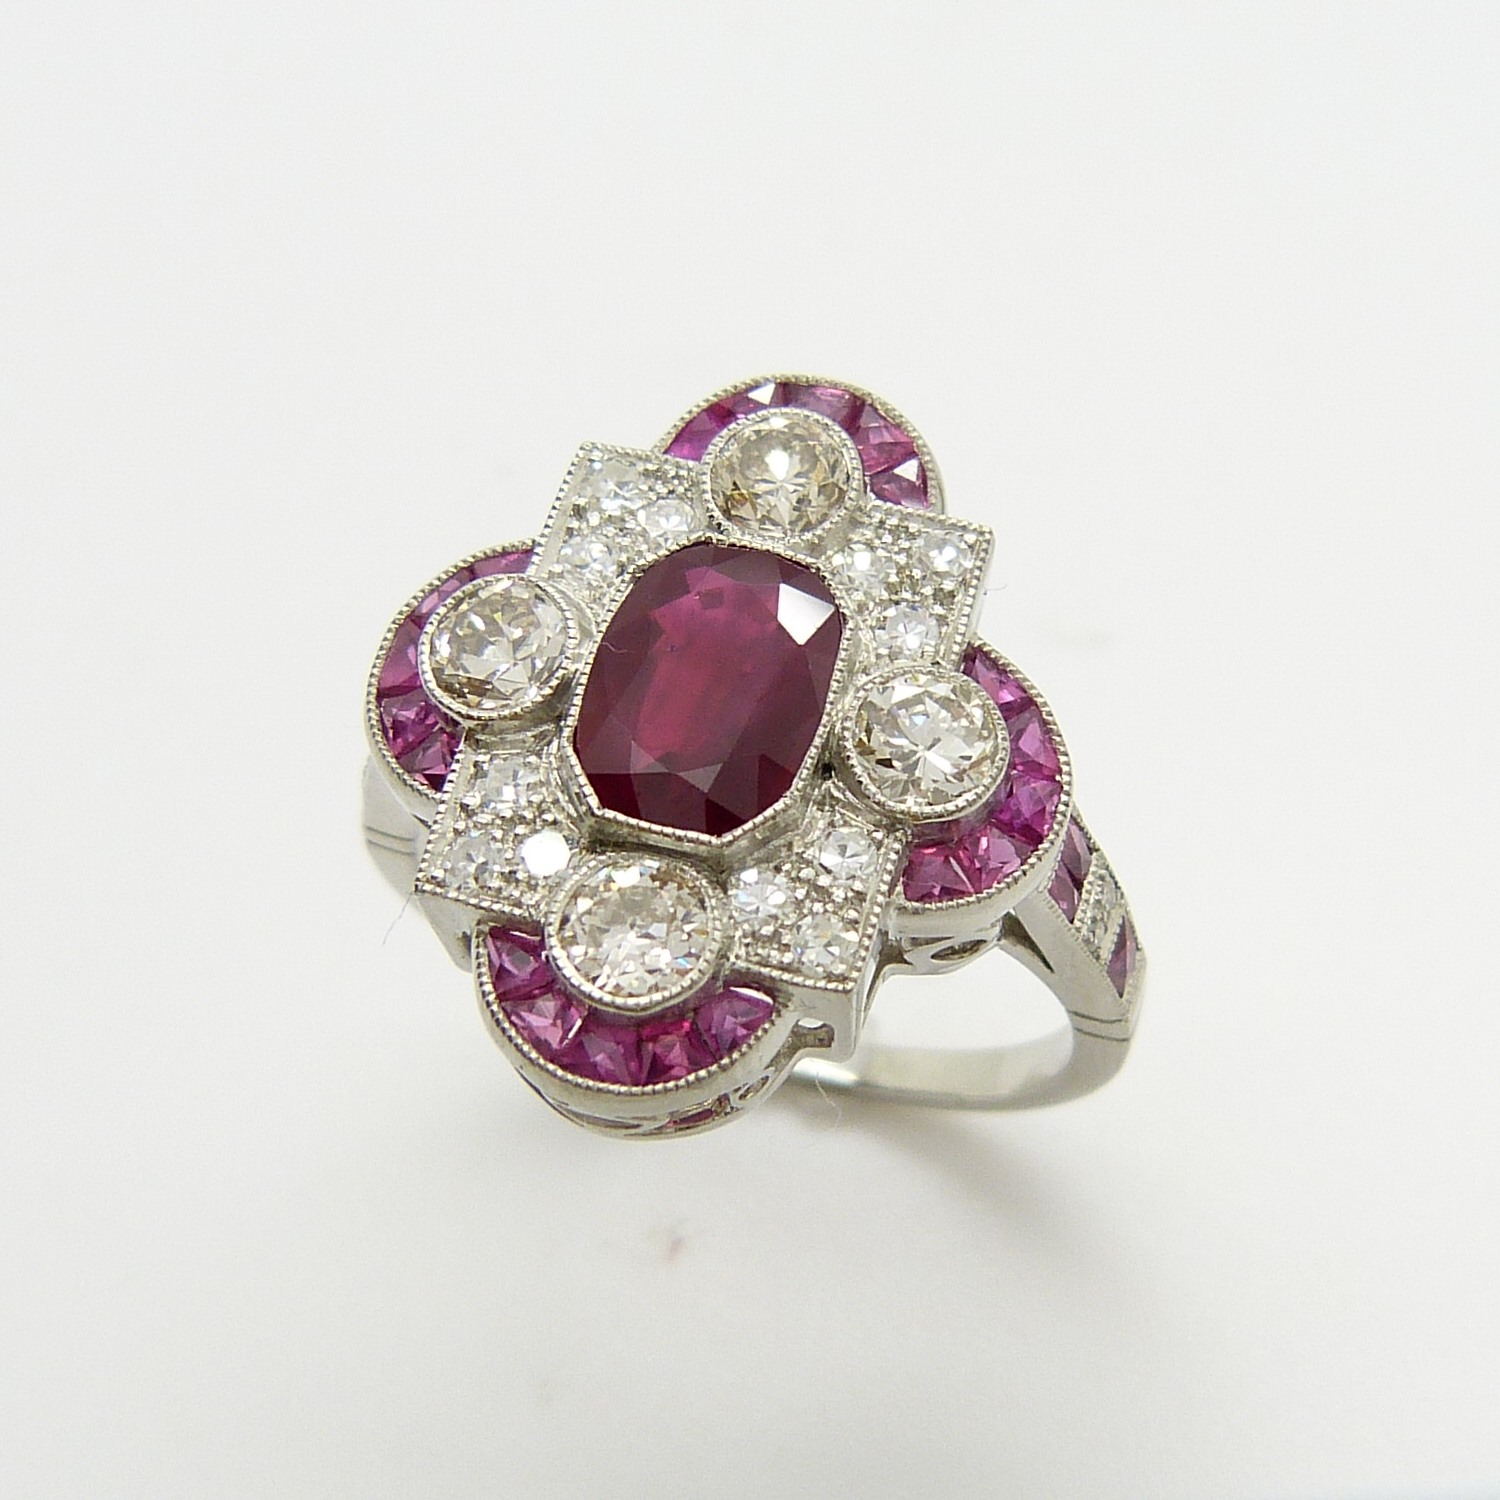 An Edwardian / Deco-style platinum ring set with rubies and diamonds - Image 6 of 7